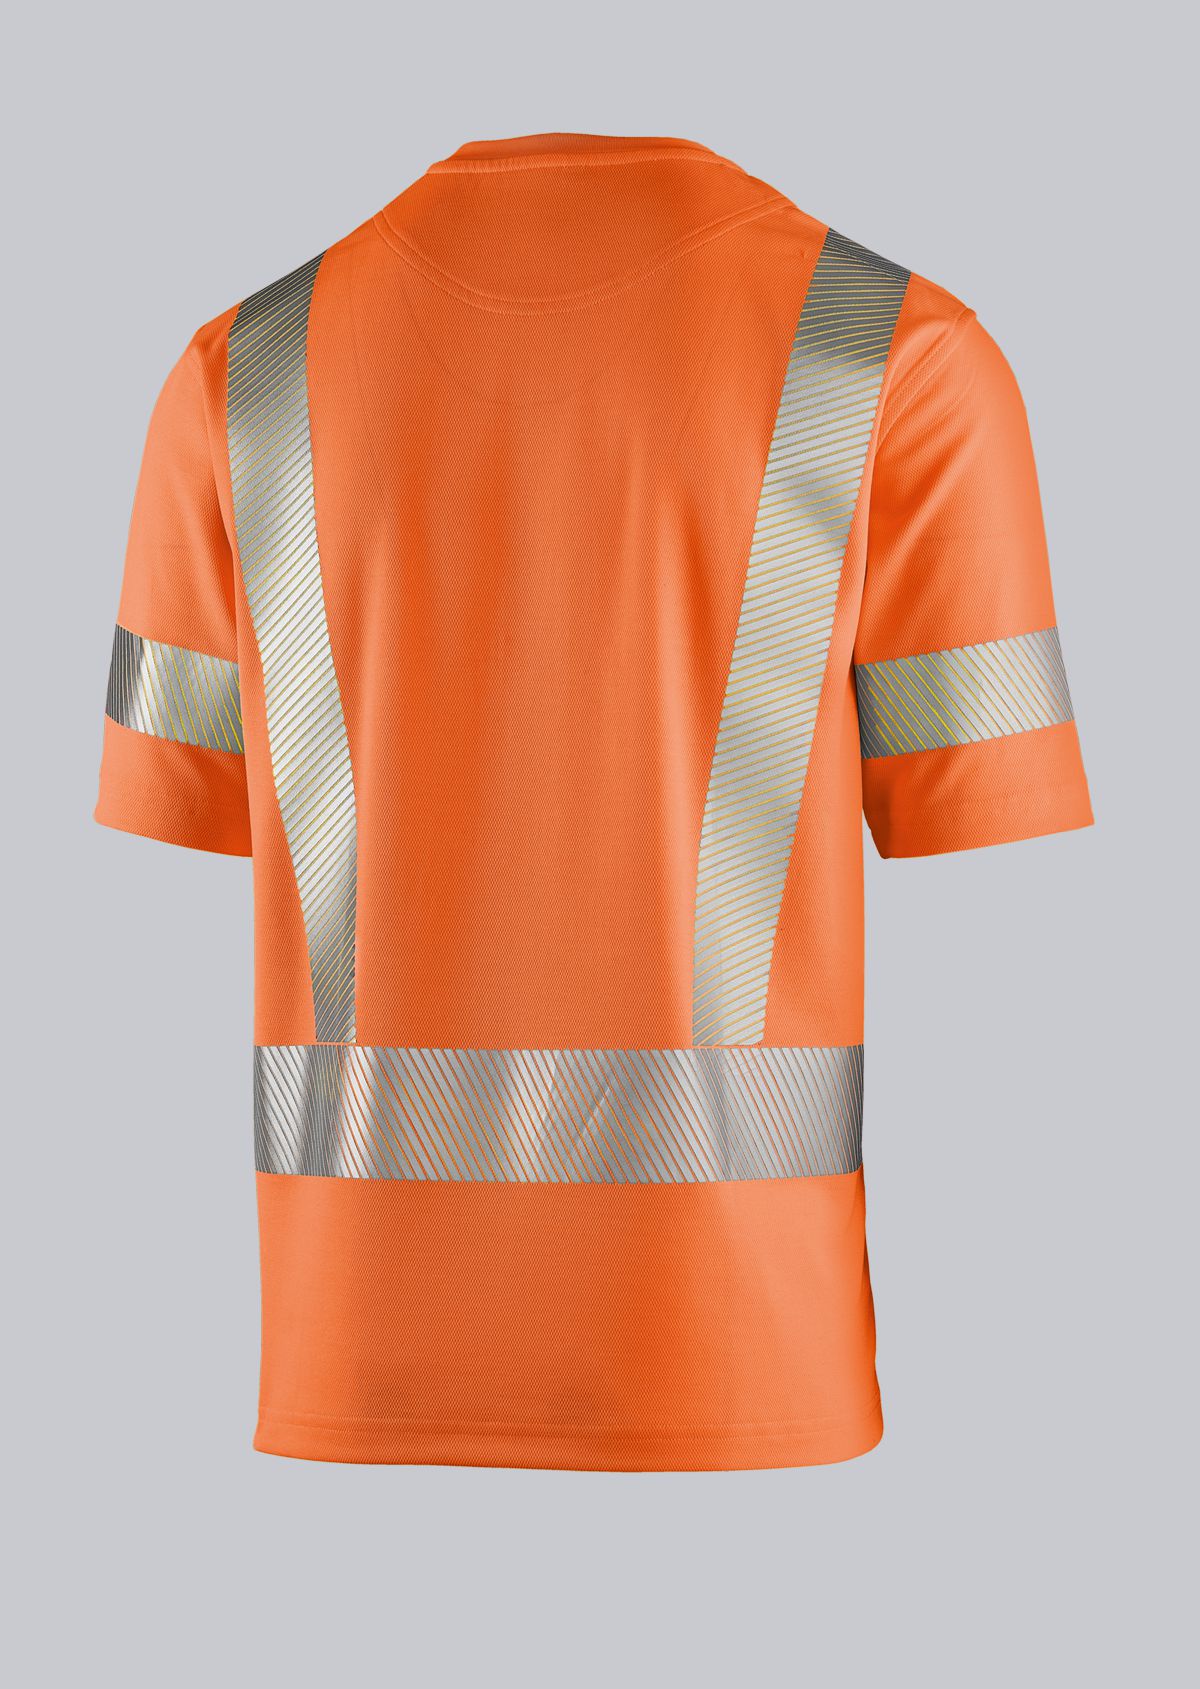 BP®High-visibility T-shirt with reflective strip sleeves